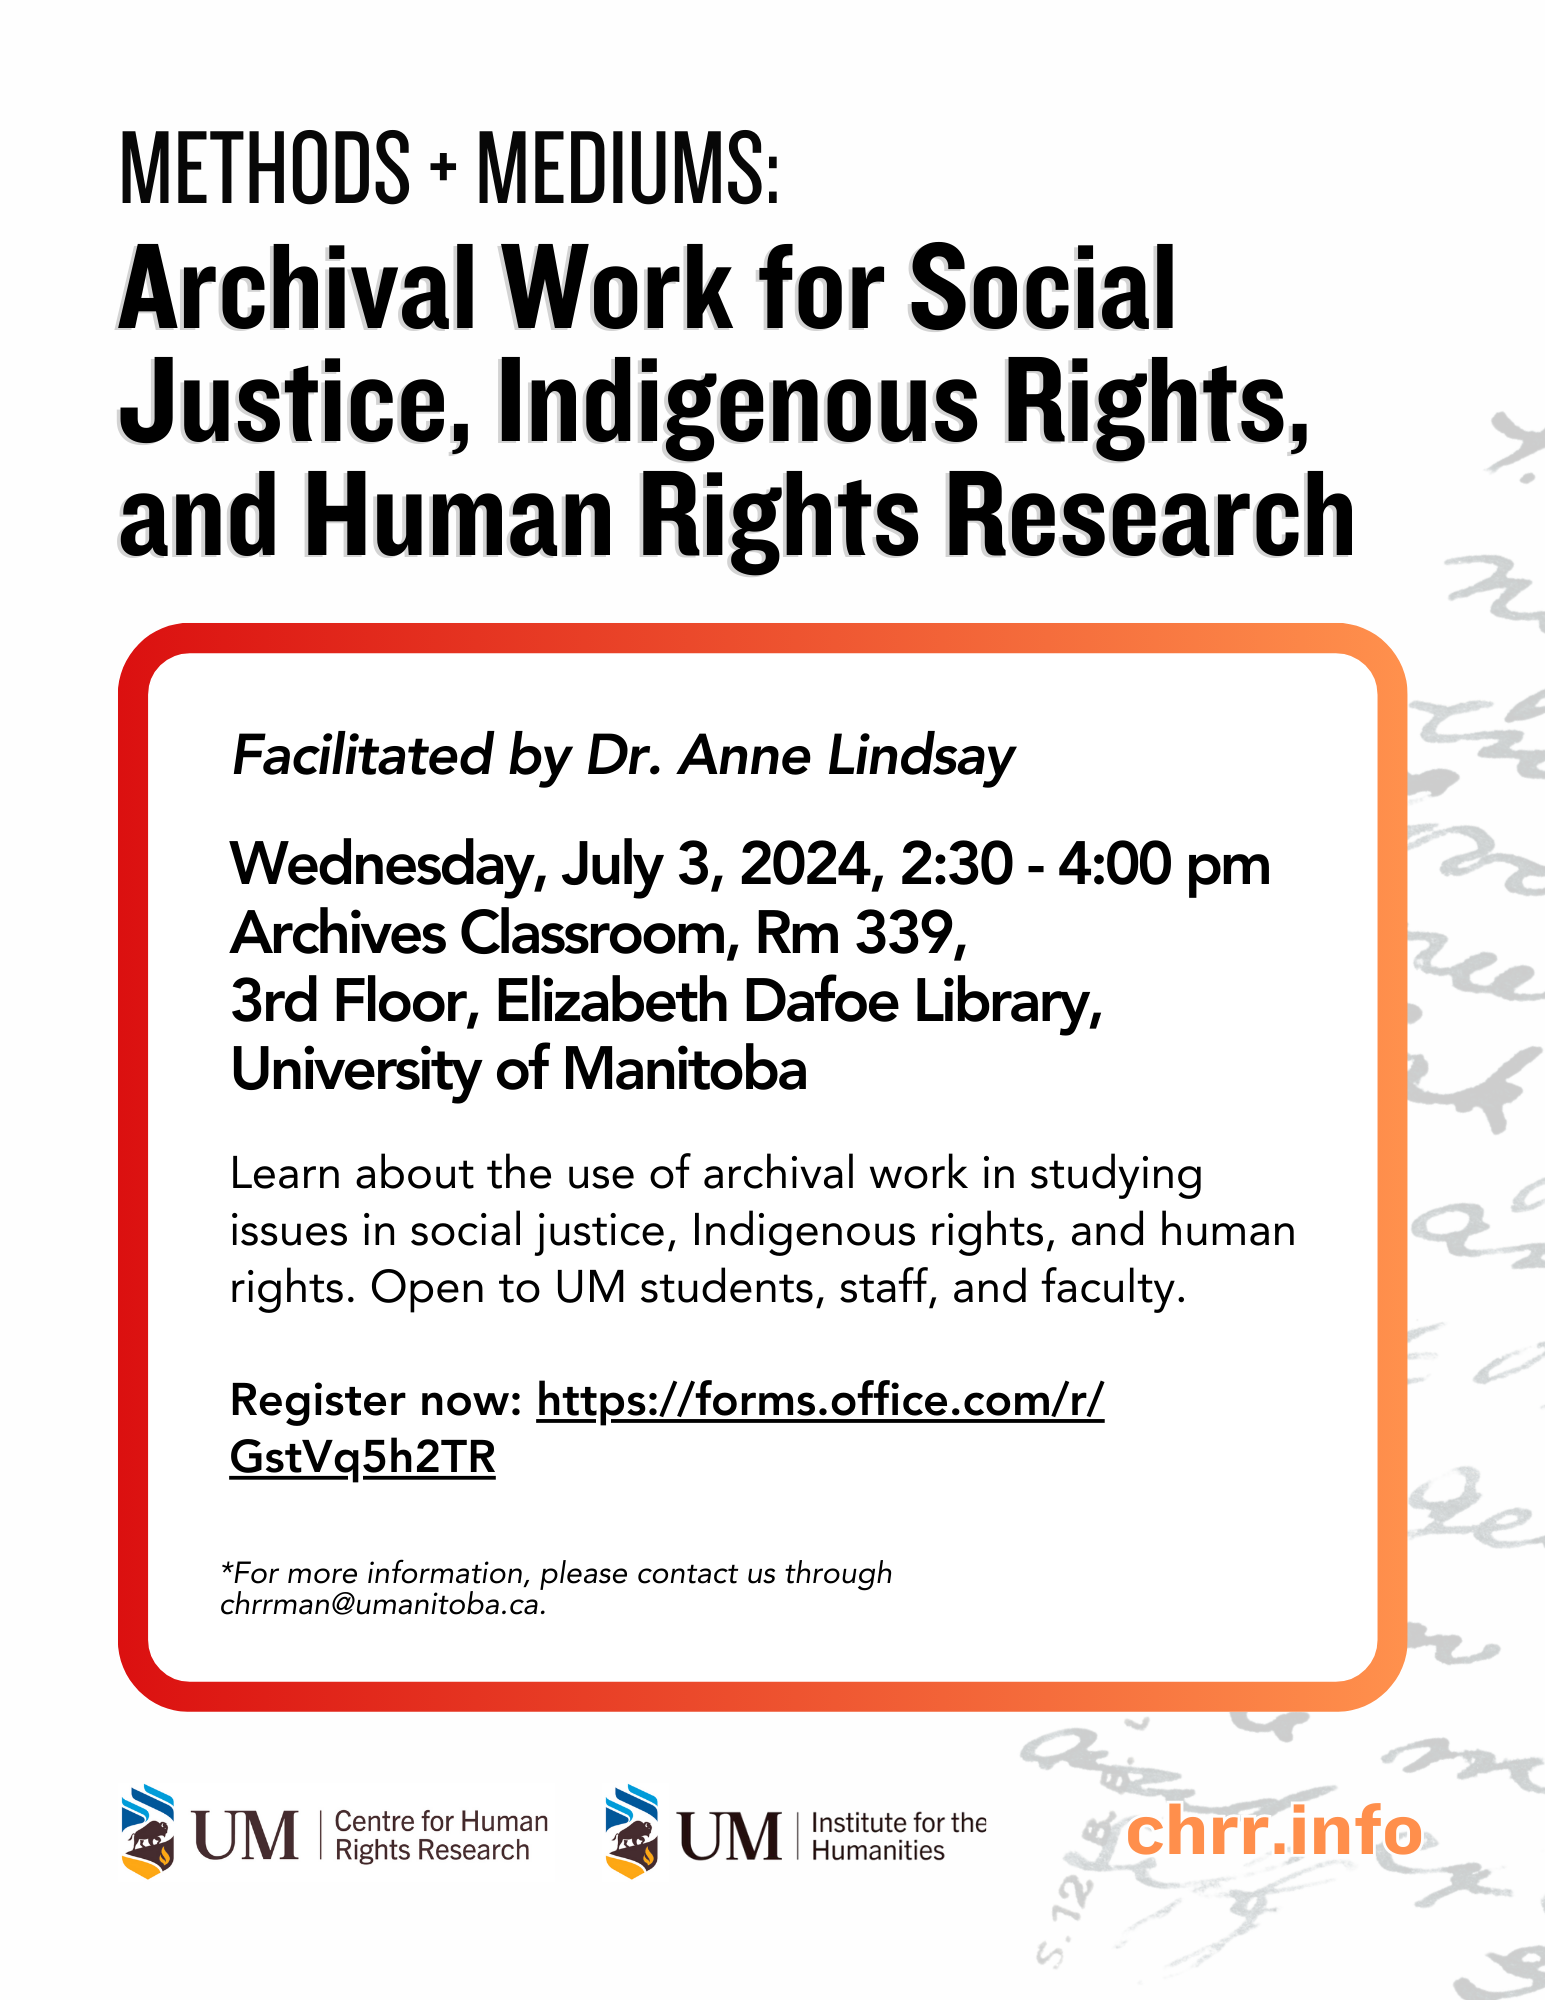 Image of poster advertising lecture on Archival Work and Social Justice, Indigenous Rights, and Human Rights Research. Image has archival text faded in the background.